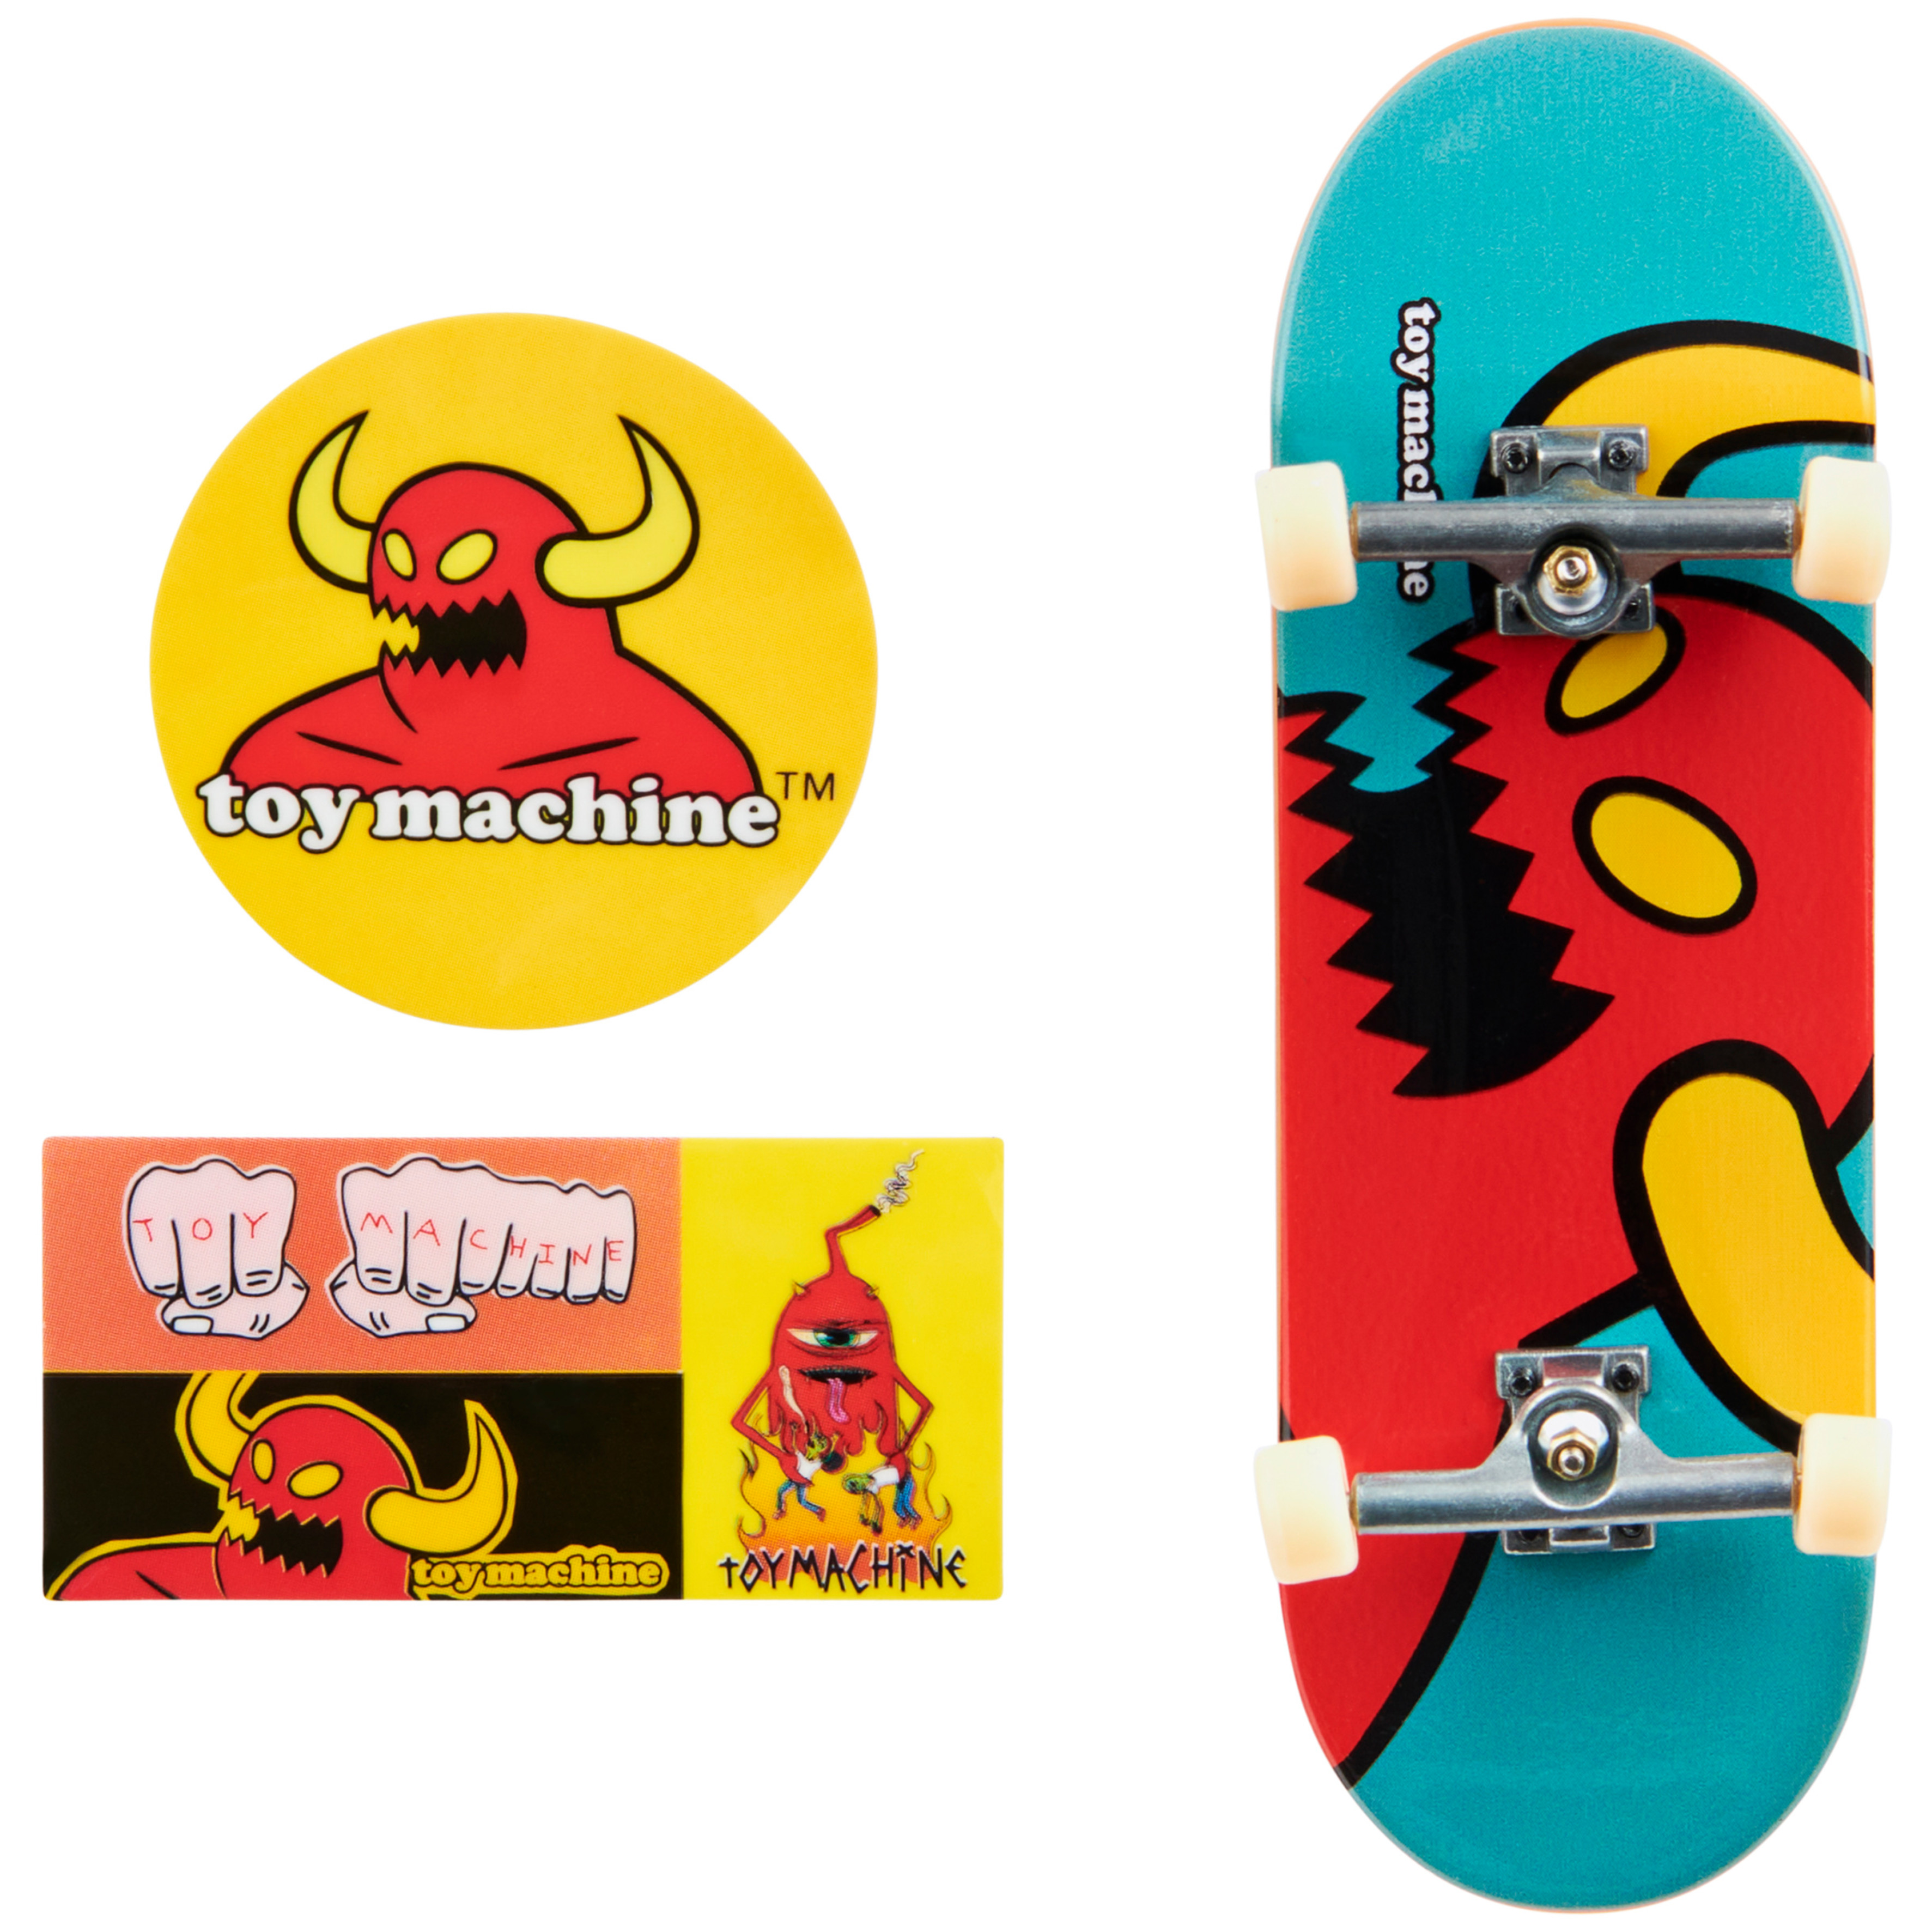 Tech Deck, 96mm Throwback Series Finger Skateboard (Styles May Vary) - image 3 of 7